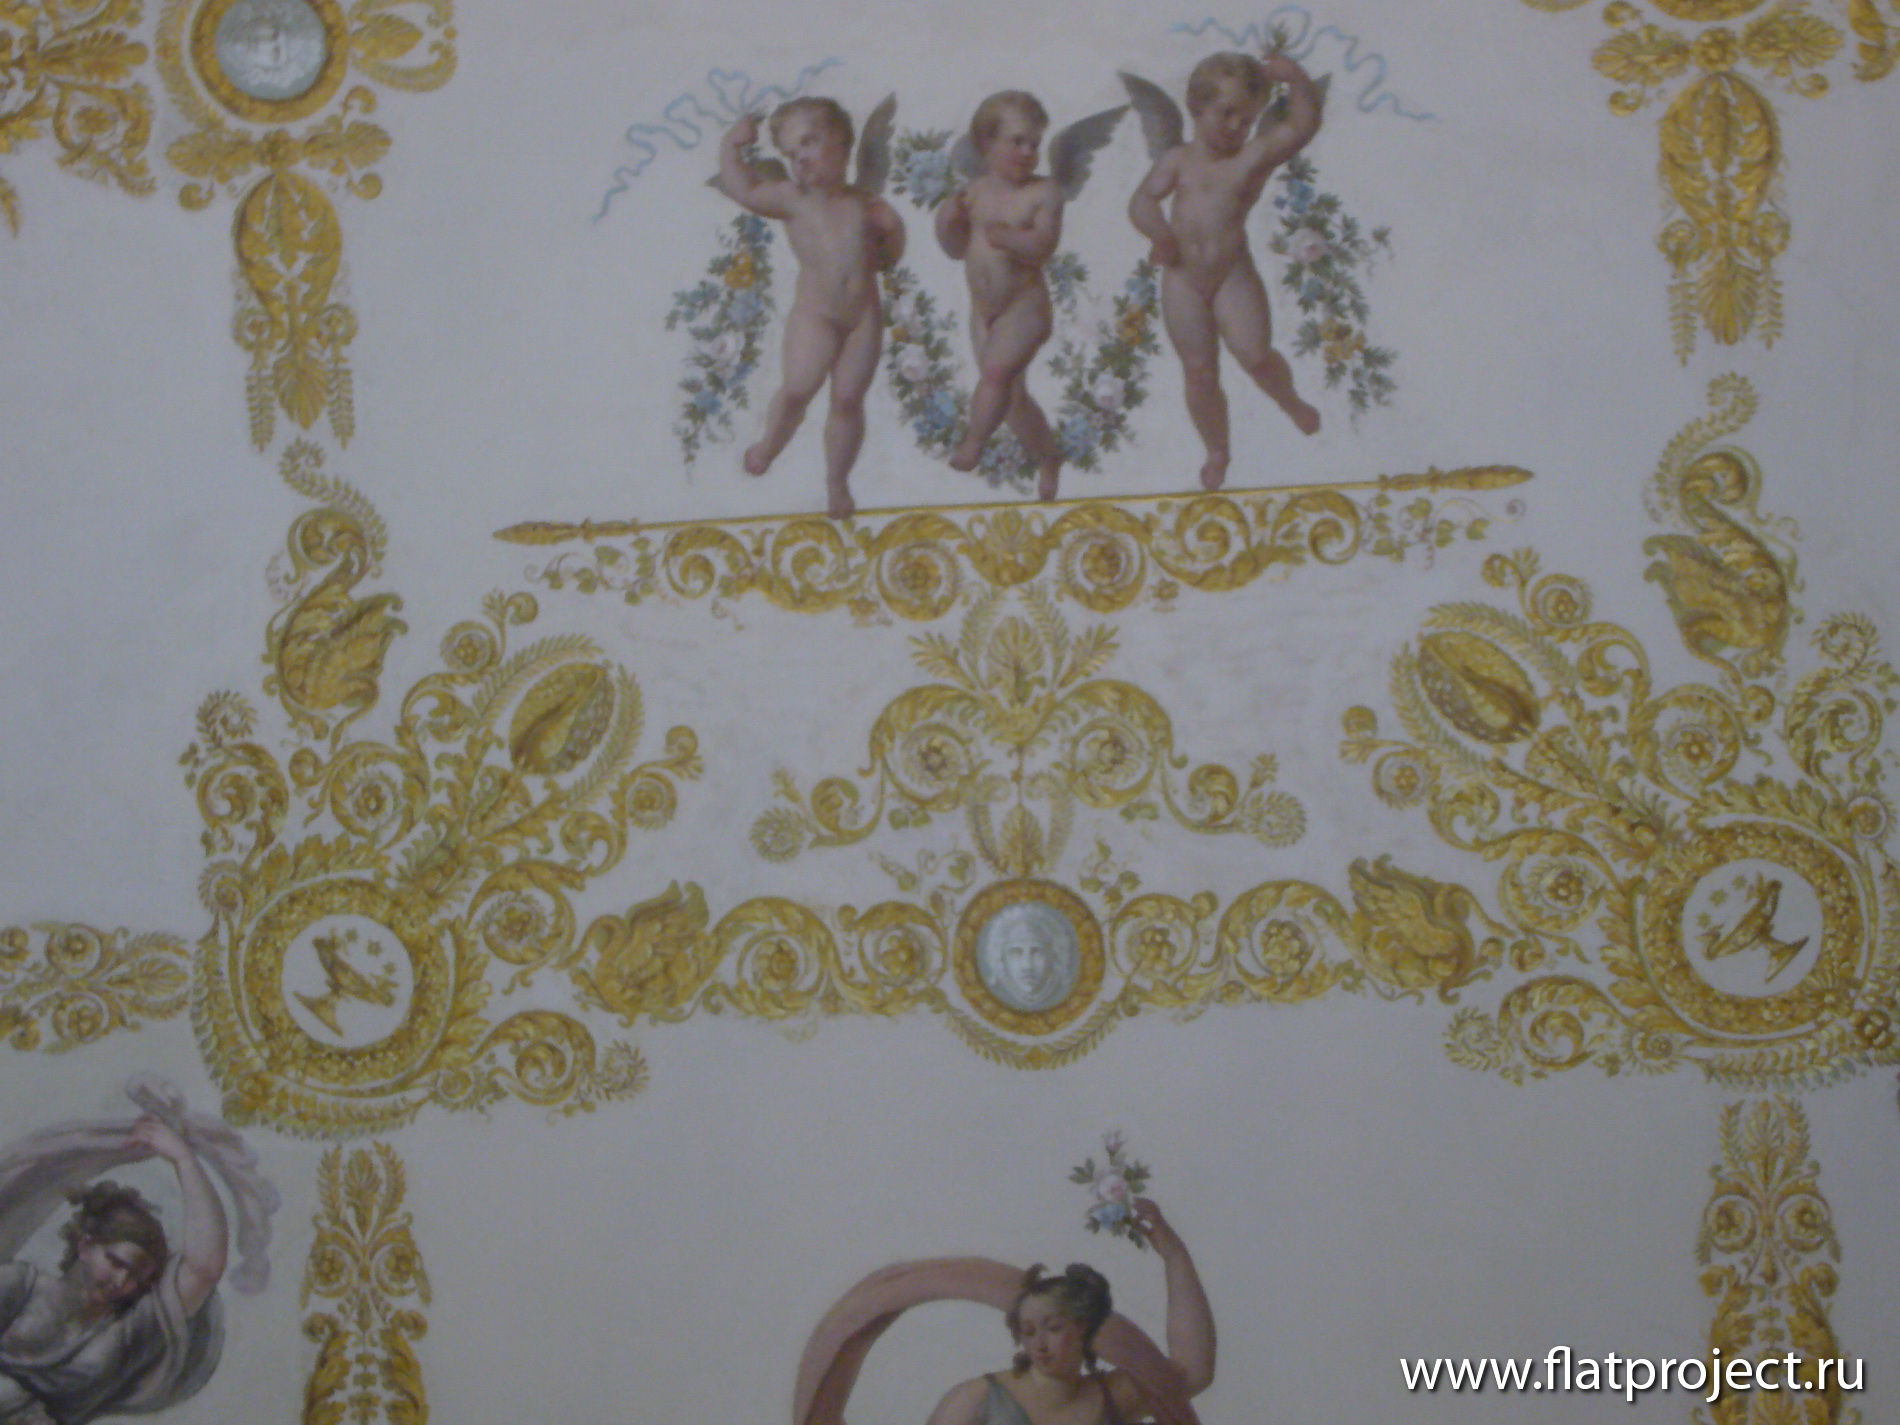 The State Russian museum interiors – photo 13